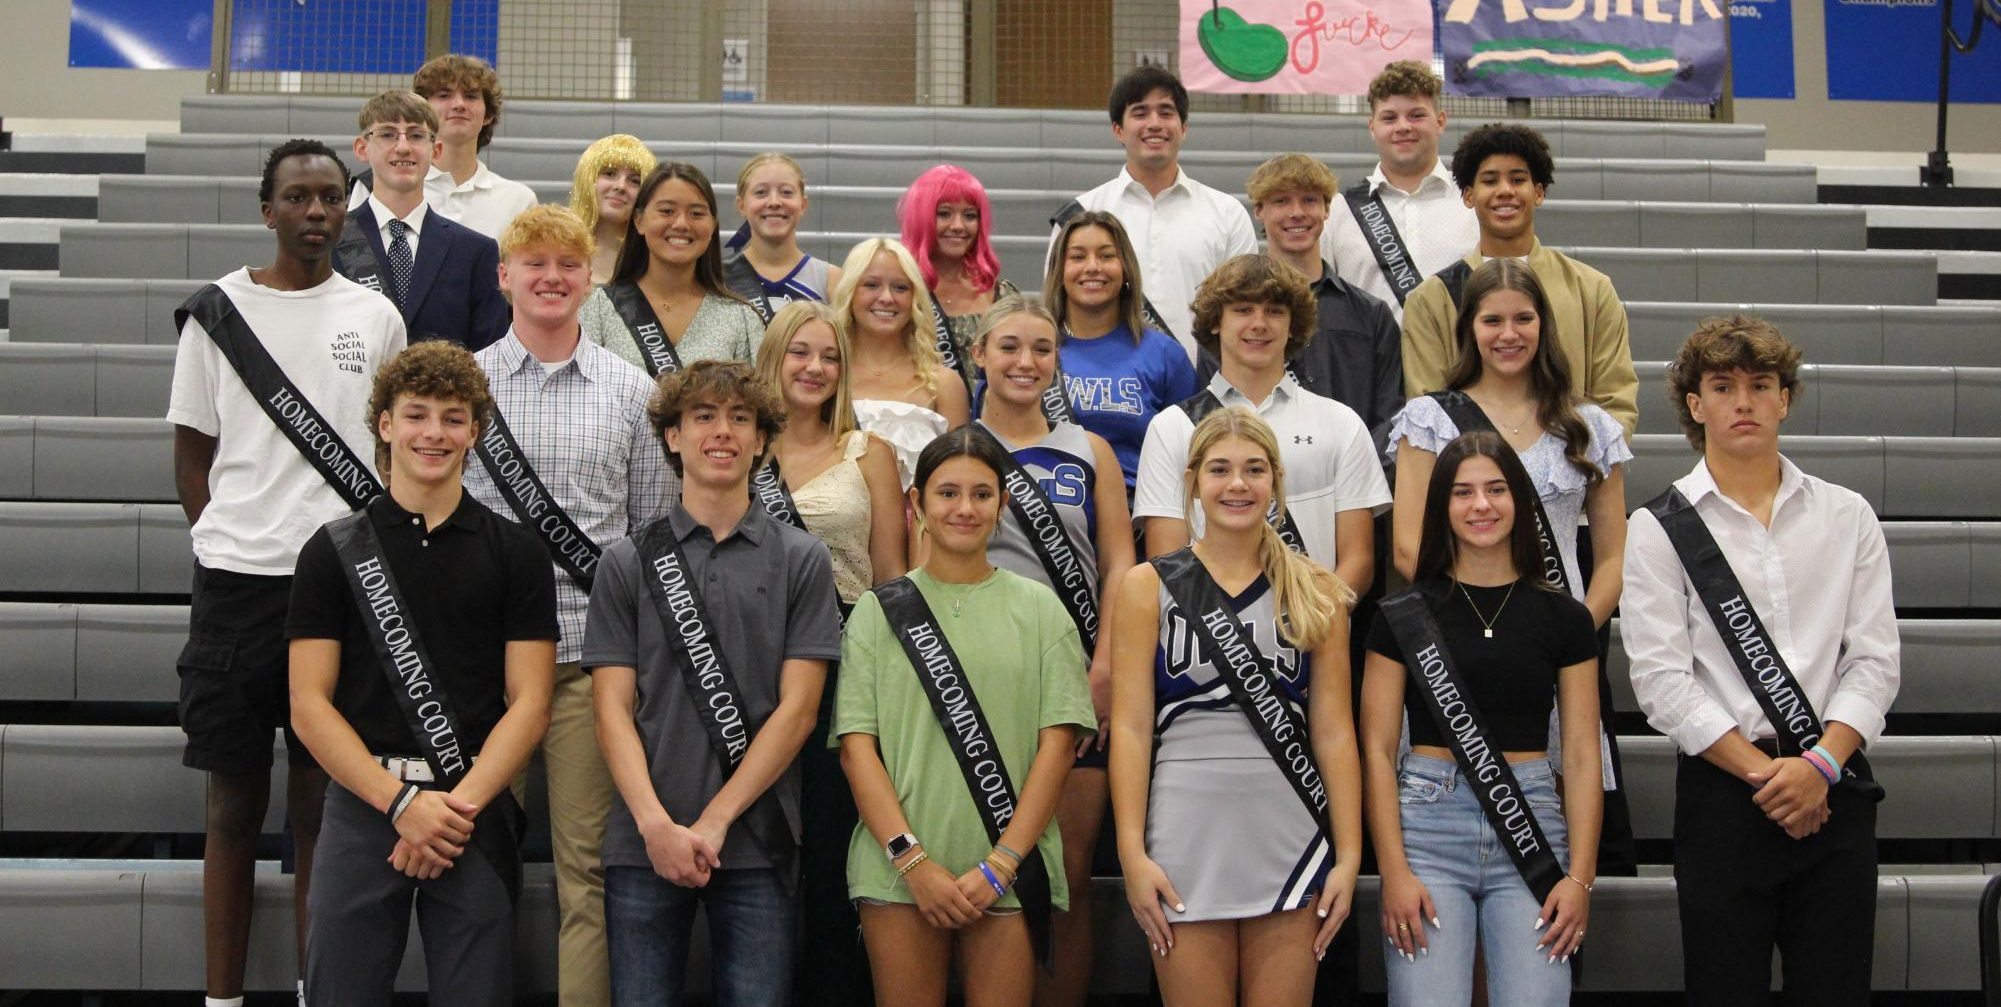 The royalty court poses together before the Monday pep assembly.